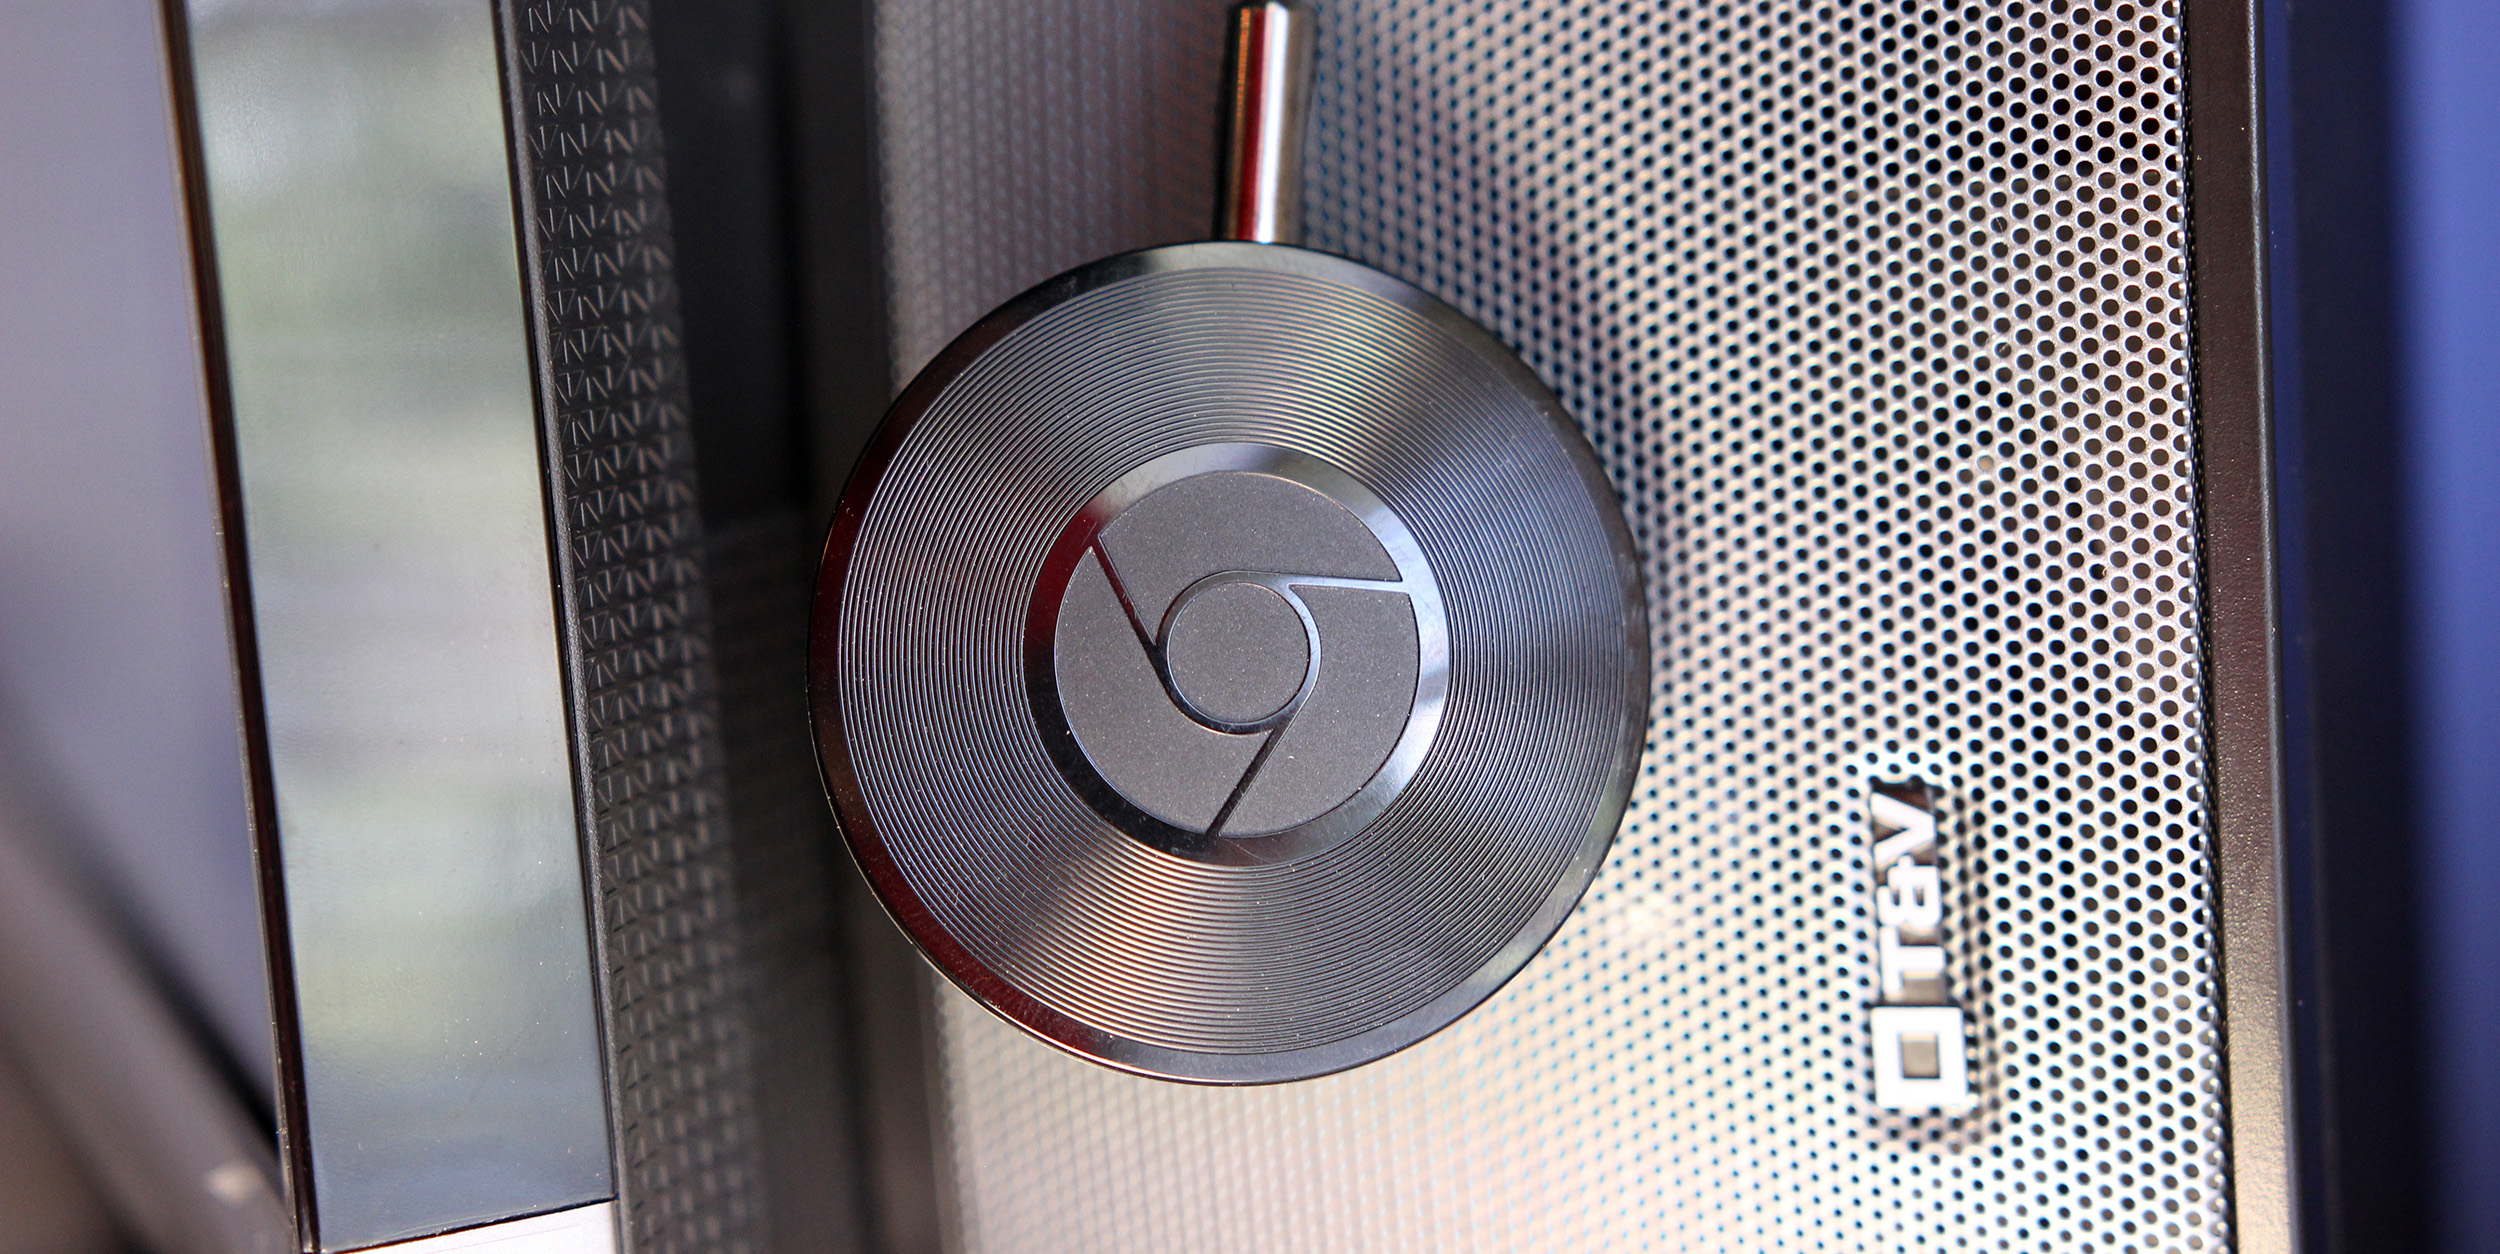 High-quality streaming is now available on Chromecast Built-In HiFi